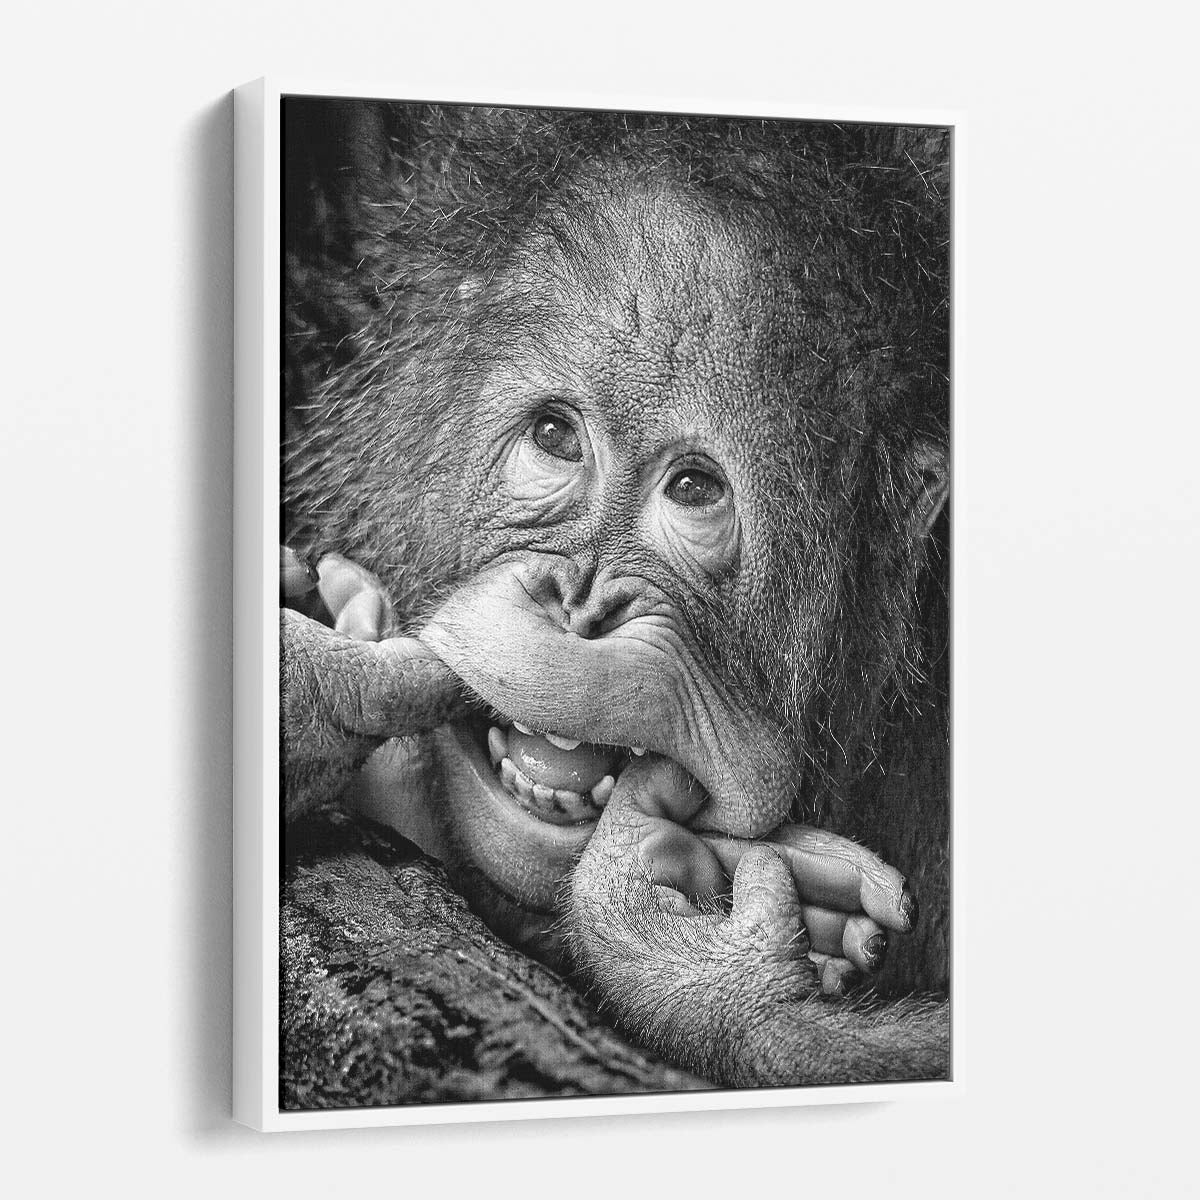 Happy Baby Orangutan Black & White Photography Wall Art by Luxuriance Designs, made in USA